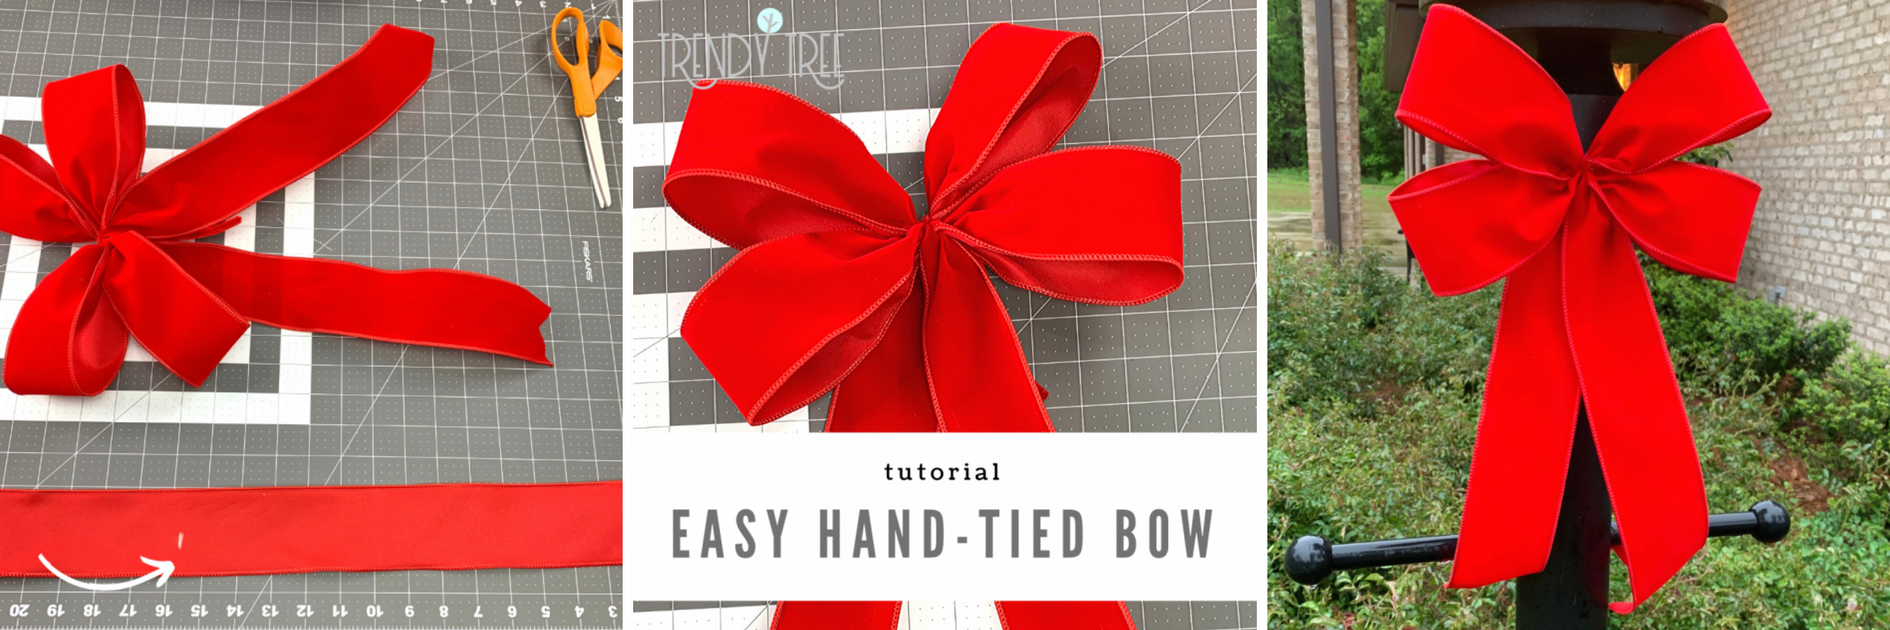 How to Tie a Bow On A Wreath In 3 Easy Steps